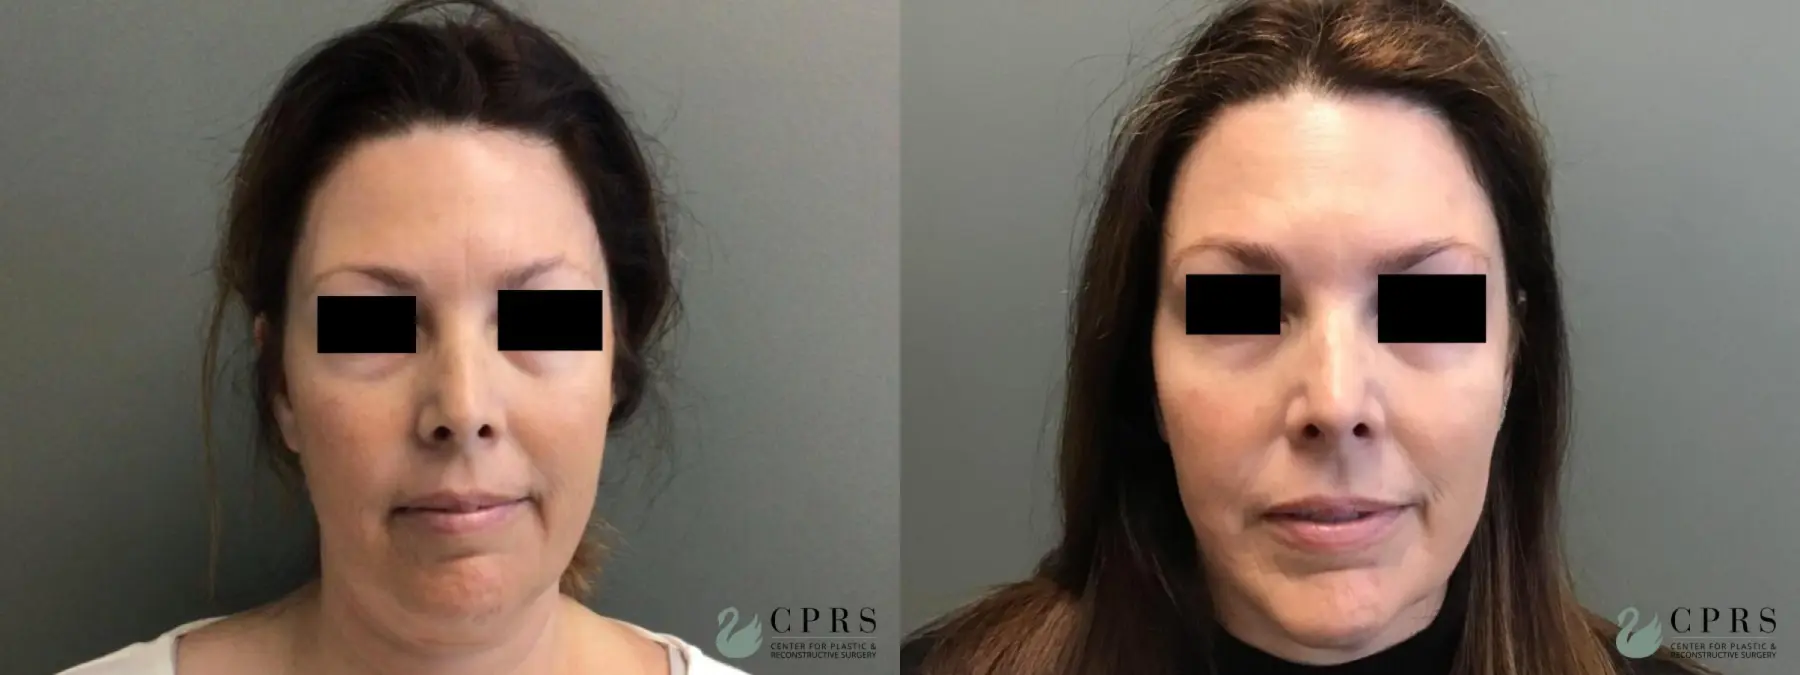 FaceTite: Patient 5 - Before and After 1